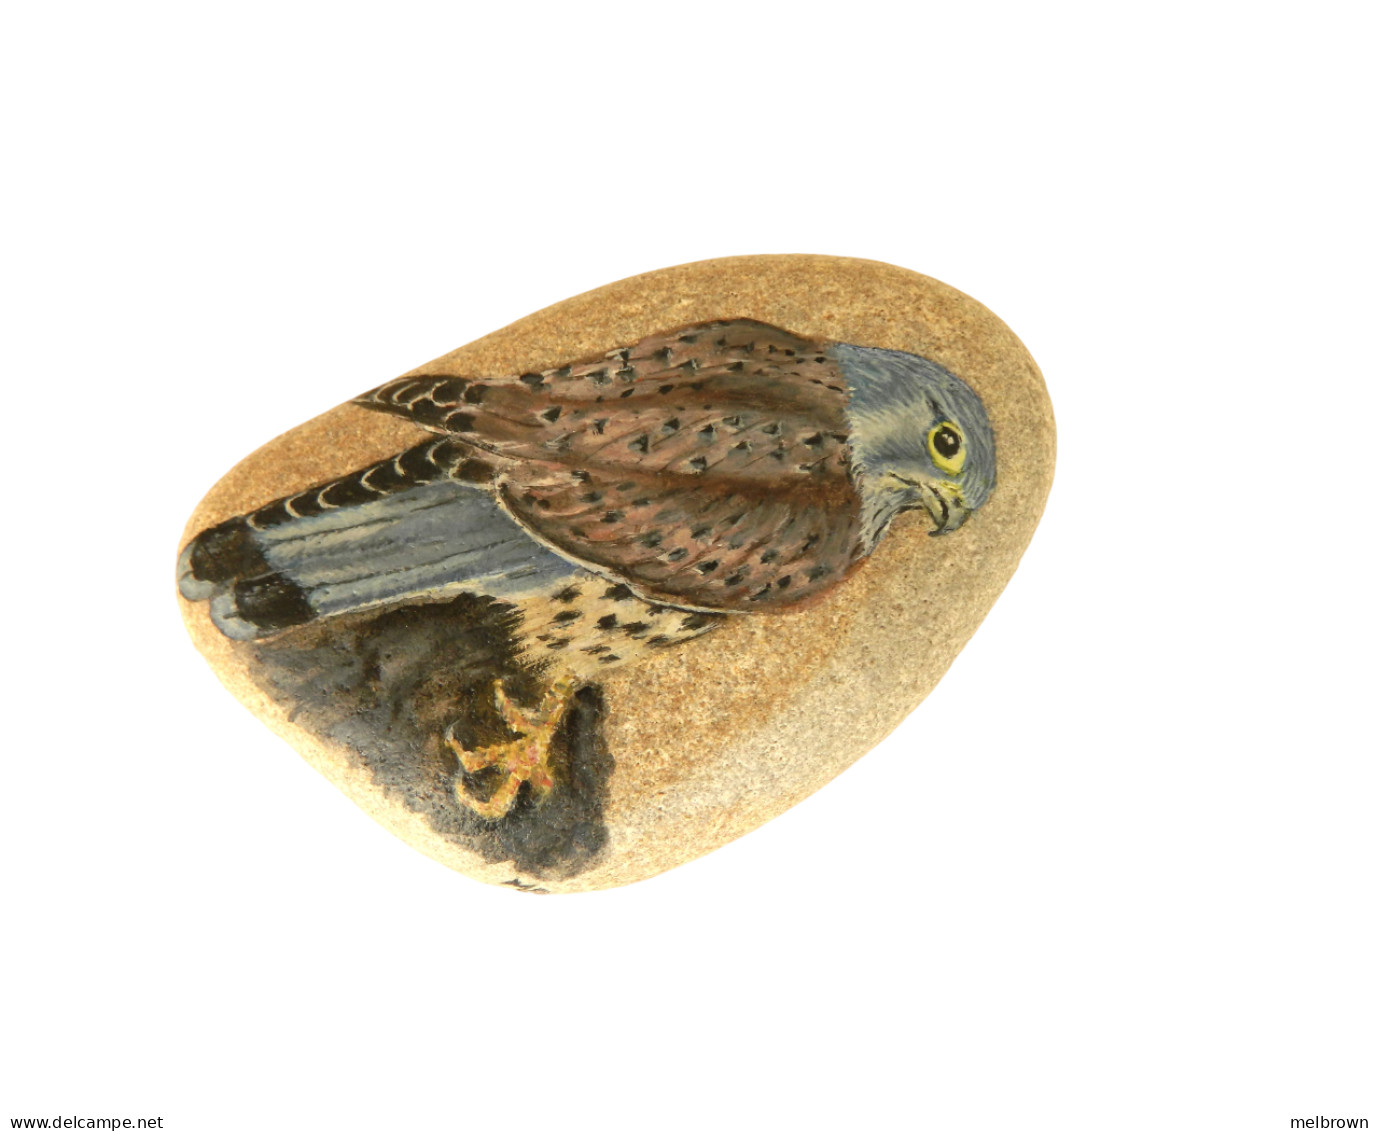 KESTREL BIRD Hand Painted On A Smooth Beach Stone Paperweight Decoration - Presse-papiers